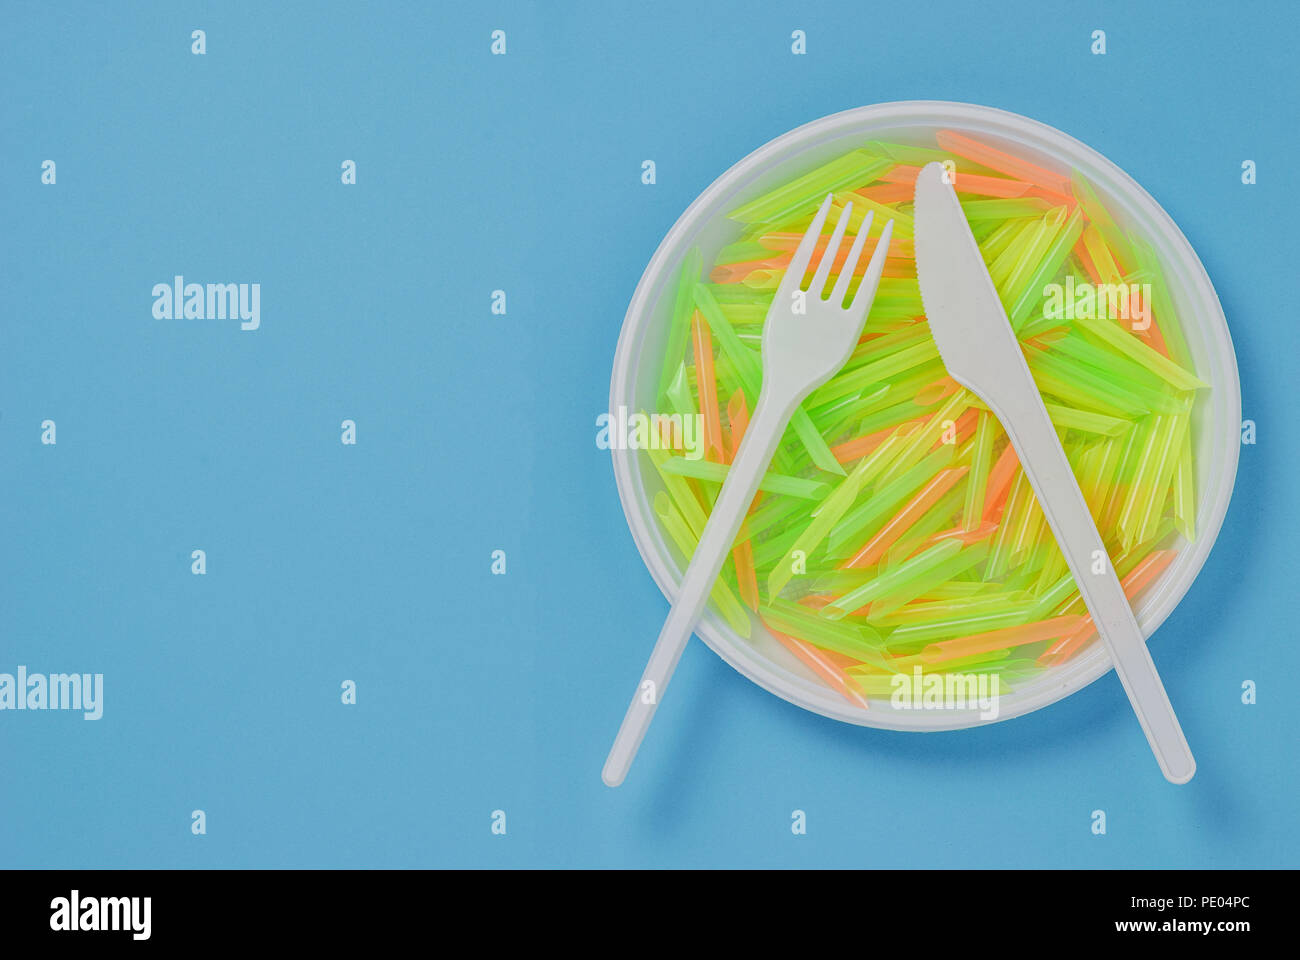 Plate, knife and fork of plastic on a blue background Stock Photo